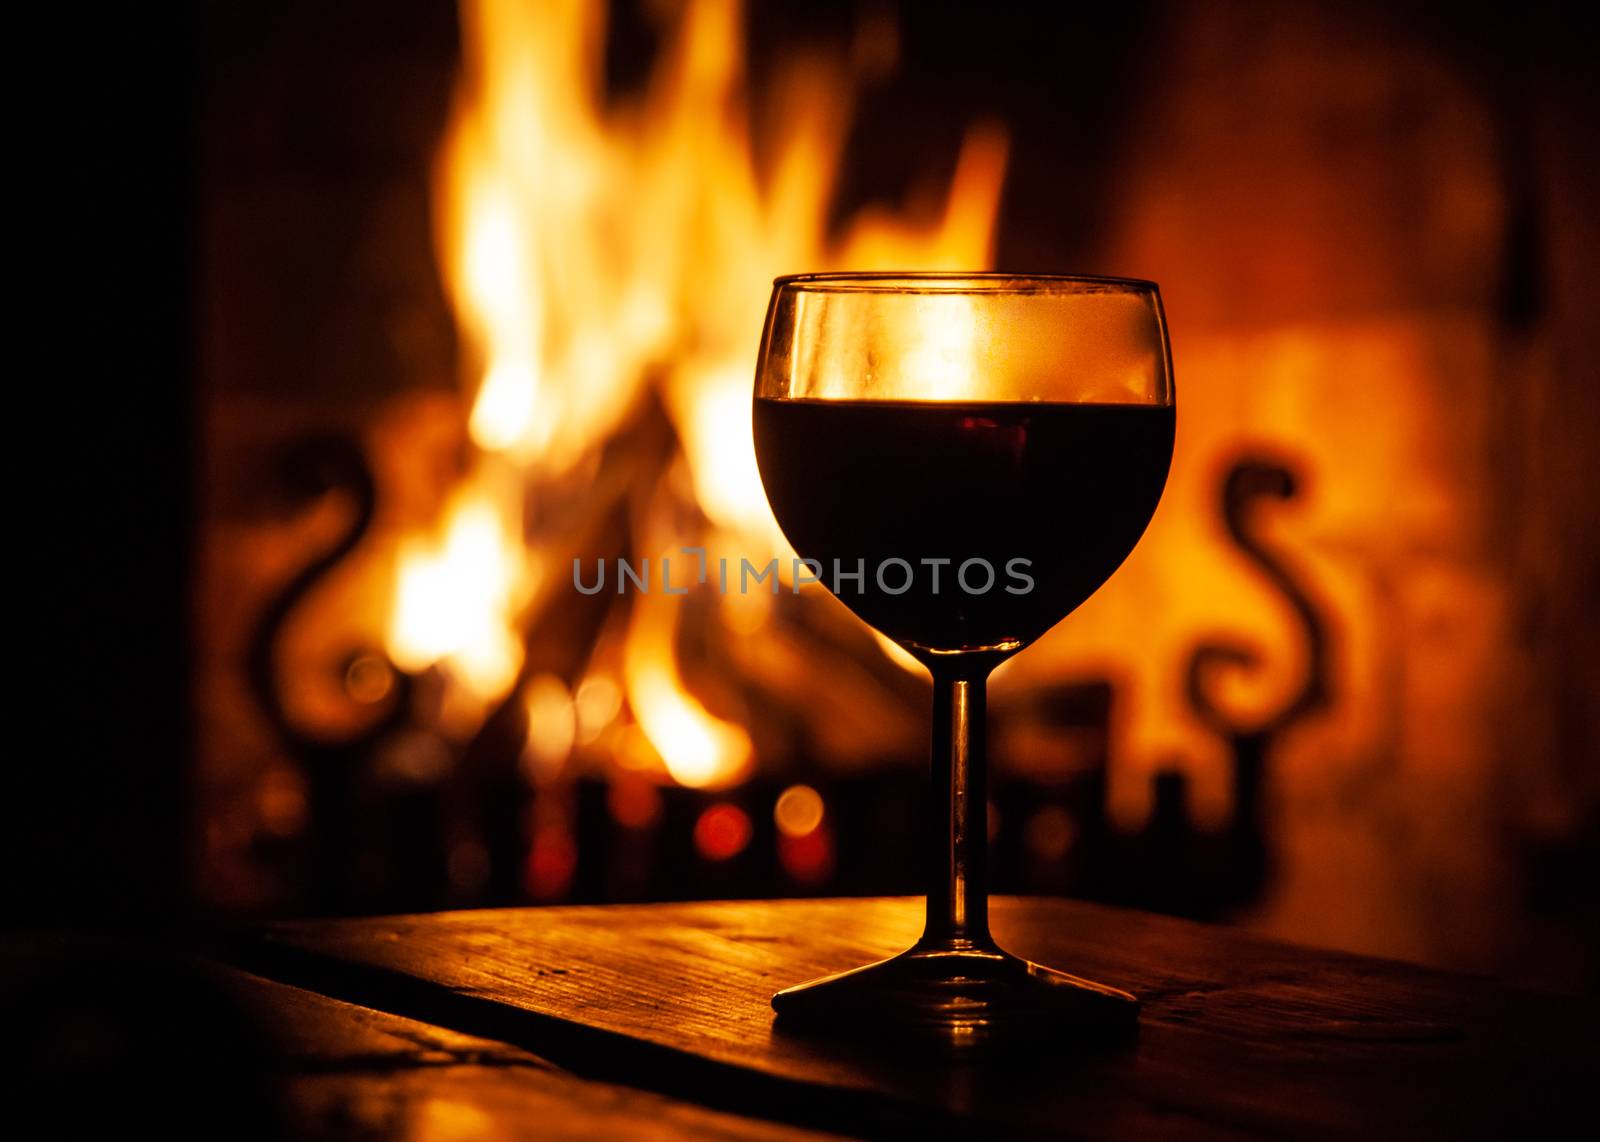 Glass of red wine on the wooden table with burning fire on the background. Evening relax on cozy place. Dark medieval style winery.